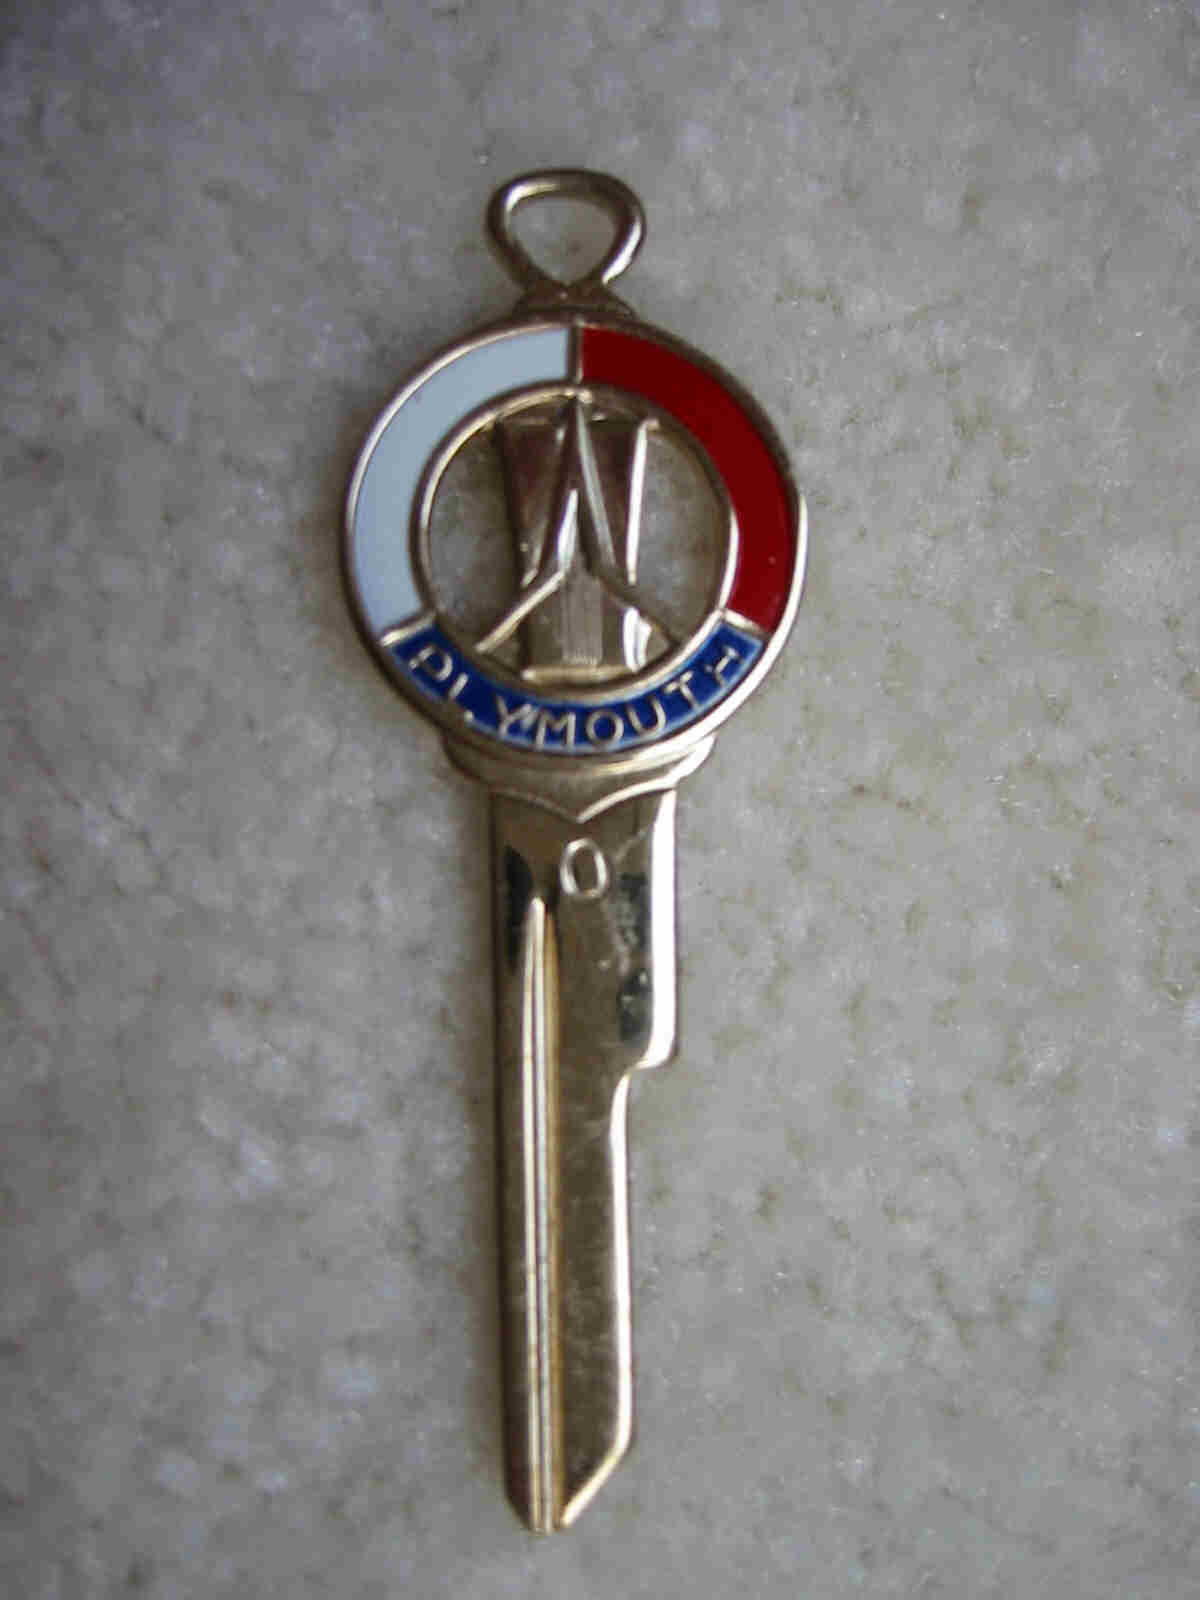 Plymouth Crest Key Blank - 1956 and Up